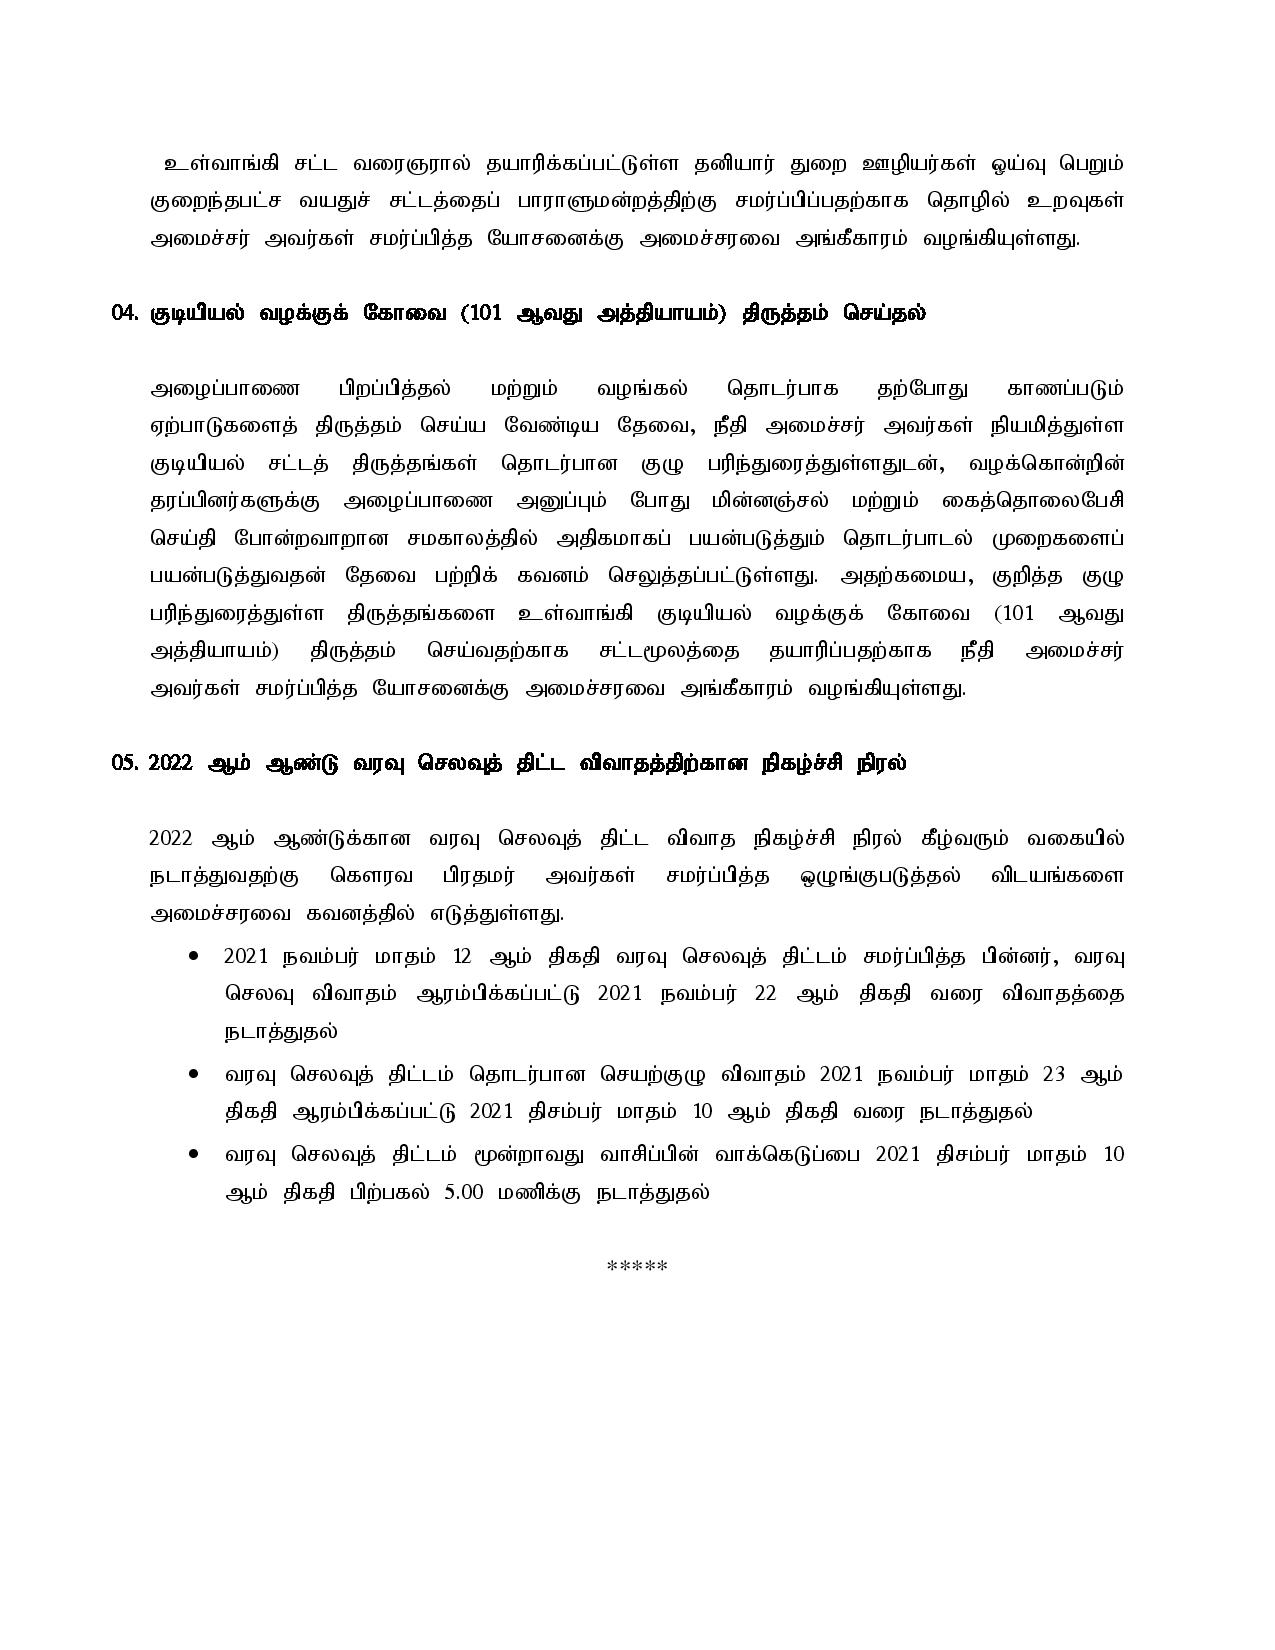 Cabinet Decisions on 11.10.2021 T page 003